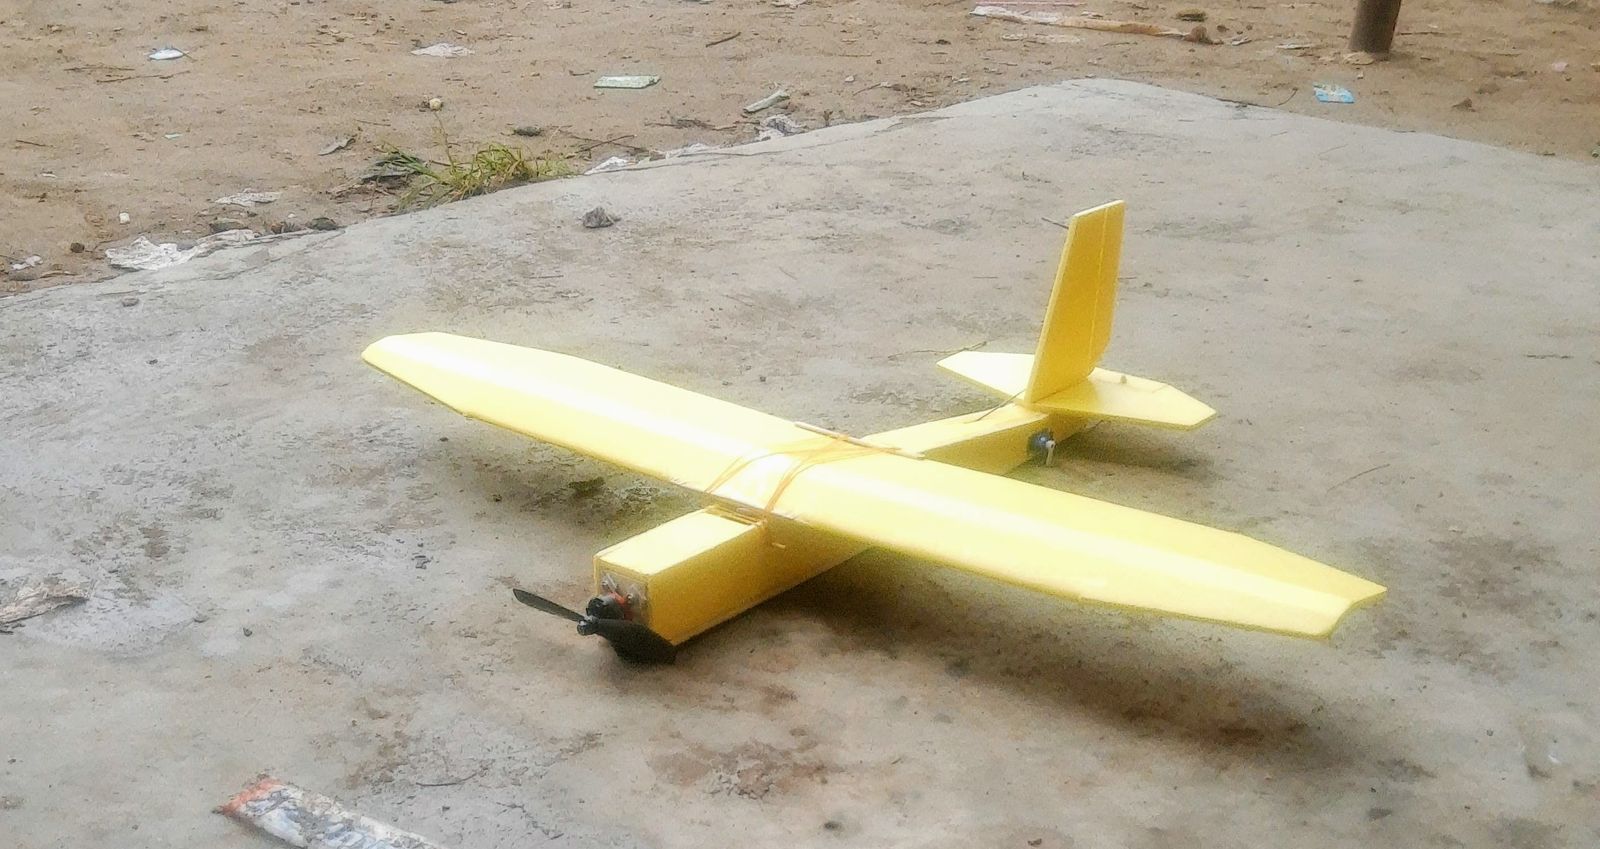 Building & flying experience of my First RC Model Airplane